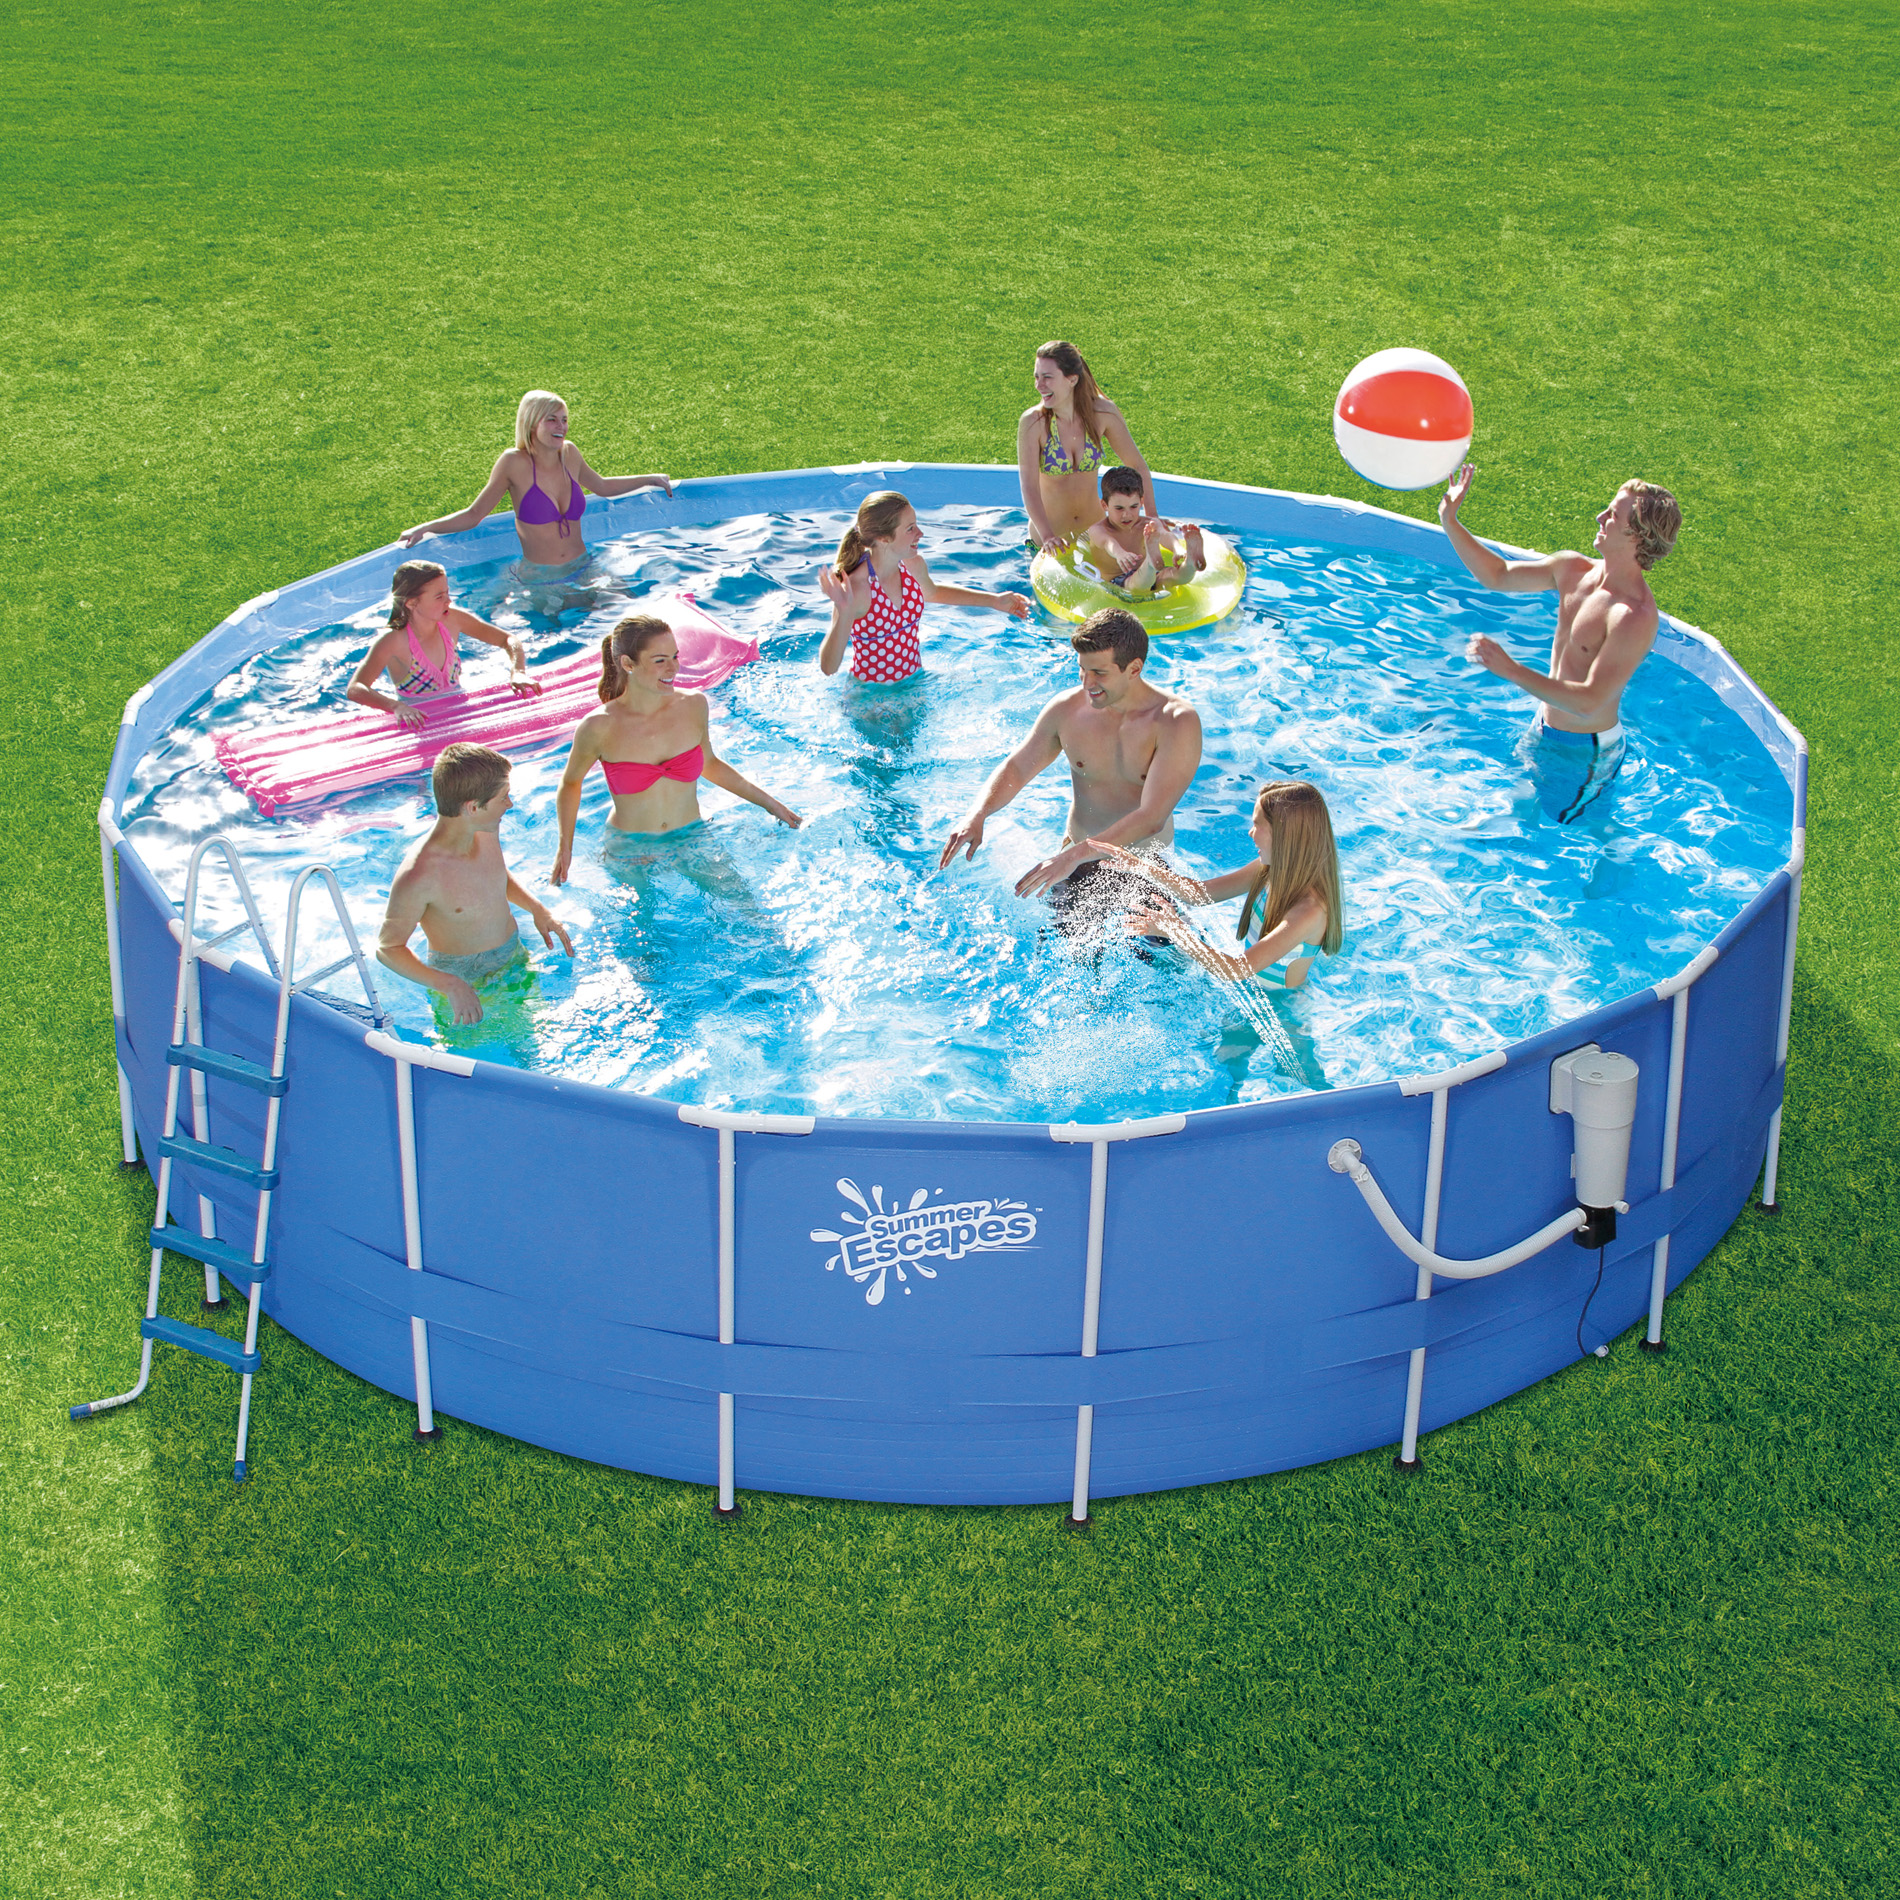 Summer Escapes 14 ft. x 42 in. Metal Frame Pool Set | Shop Your Way